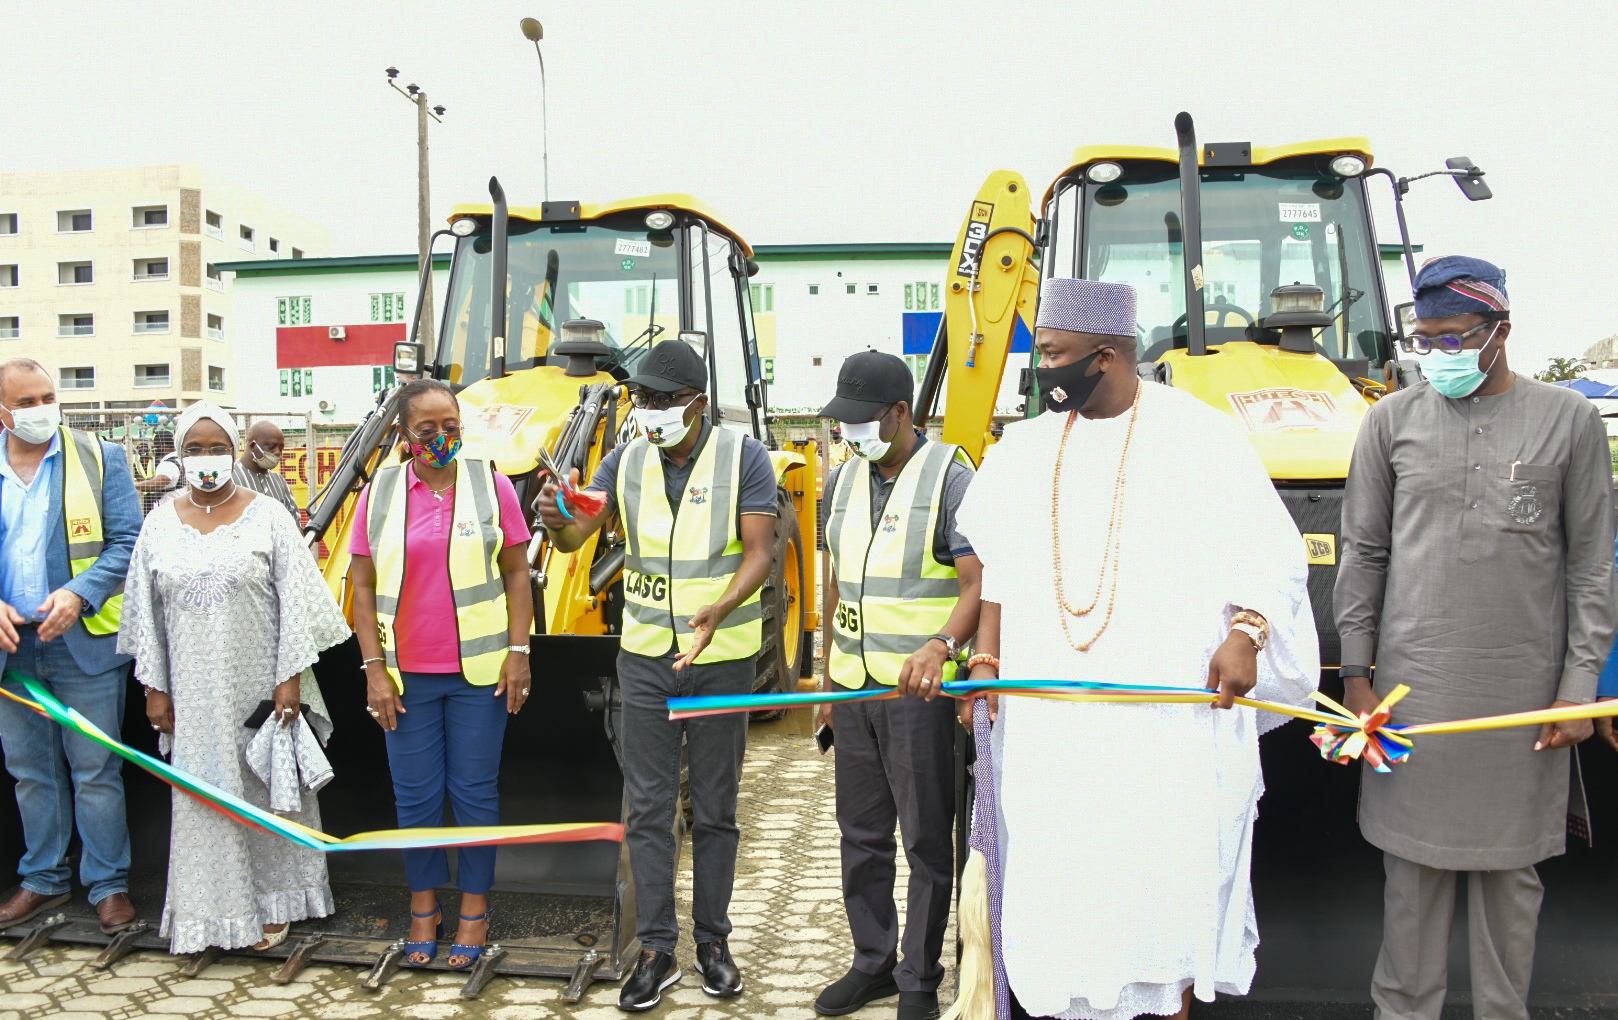 L-R: Representative of Hitech Construction Company, Mr. Danny Abboud; Secretary to the Lagos State Government, Mrs. Folasade Jaji; Special Adviser on Works and Infrastructure, Mrs. Aramide Adeyoye; Governor Babajide Sanwo-Olu; his Deputy, Dr. Obafemi Hamzat; Elegushi of Ikateland, Oba Saheed Elegushi, Kusenla III and Head of Service, Mr. Hakeem Muri-Okunola, during the flag-off of Lekki Regional Road as part of activities to commemorate the First Year in Office of the Sanwo-Olu administration, at Eti-Osa Local Government, on Saturday, May 30, 2020.